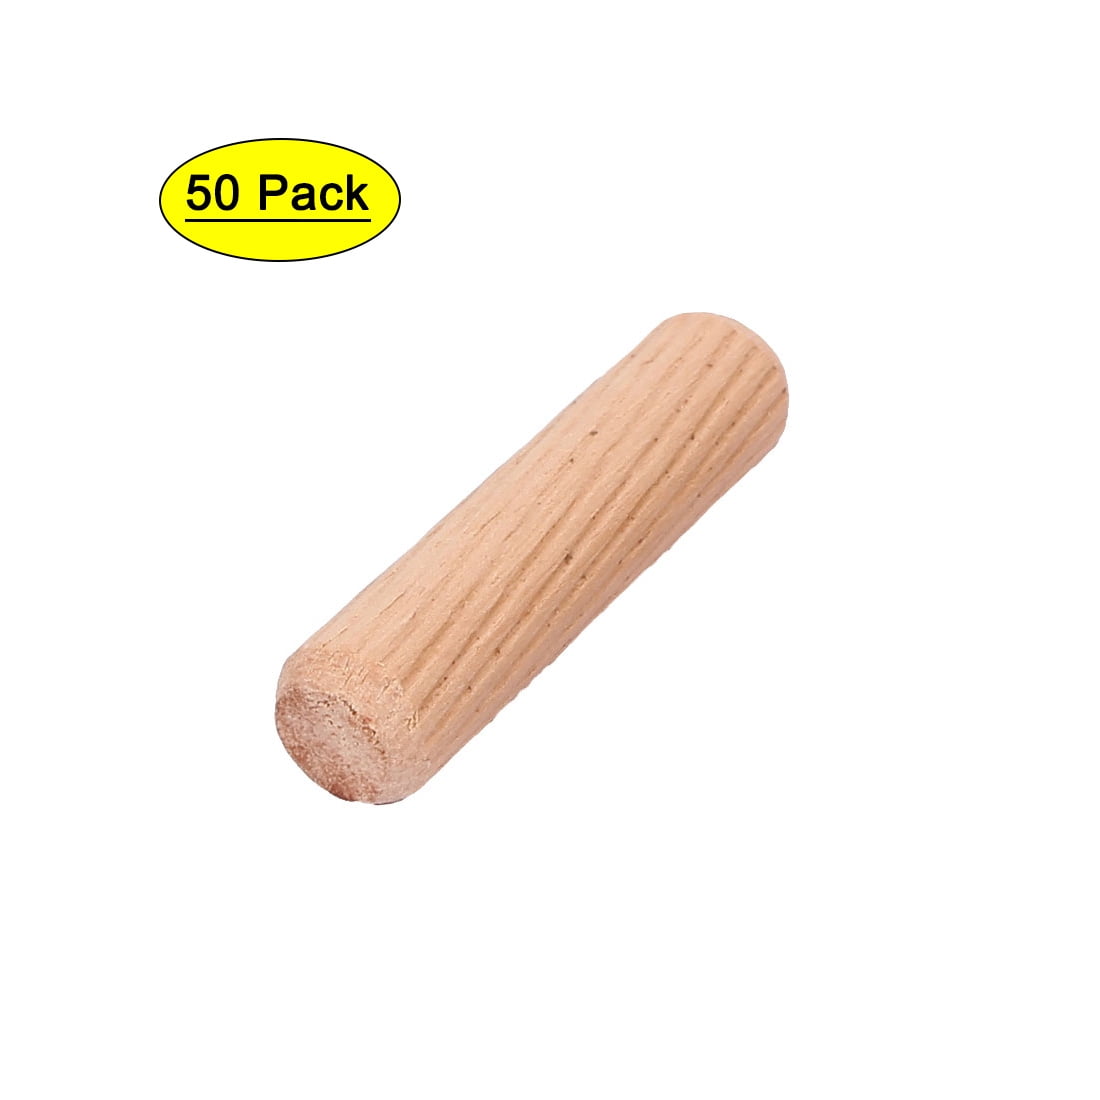 6 * 40mm 100pcs Wood Dowel,M6 M8 M10 Craft Dowel Rods Woodworking Round Fluted Wood Dowel Beech Pins with Chamfered Ends for Constructing Strong Wood Joints 